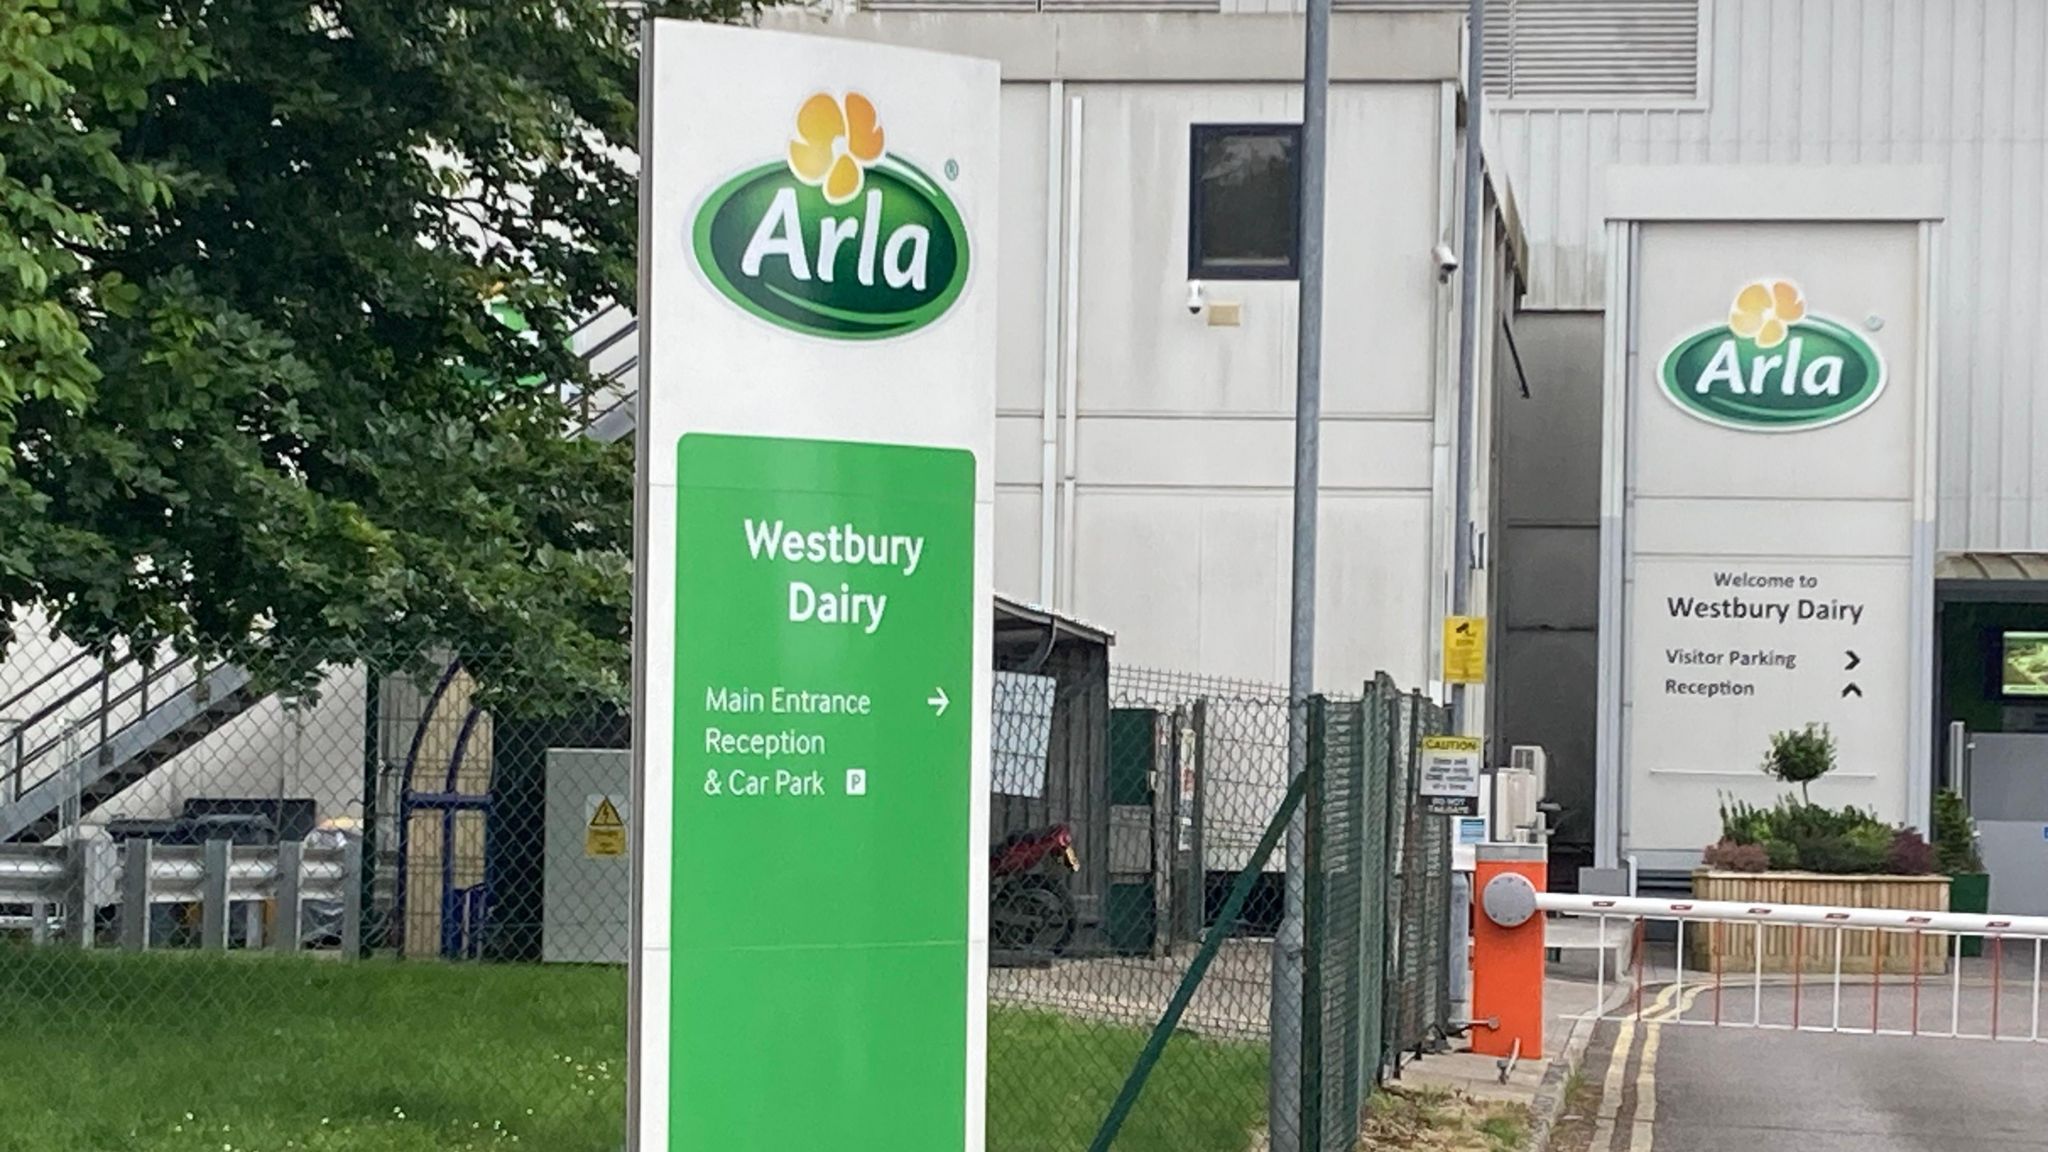 A green entry sign for Arla in front of a grey building on an industrial estate